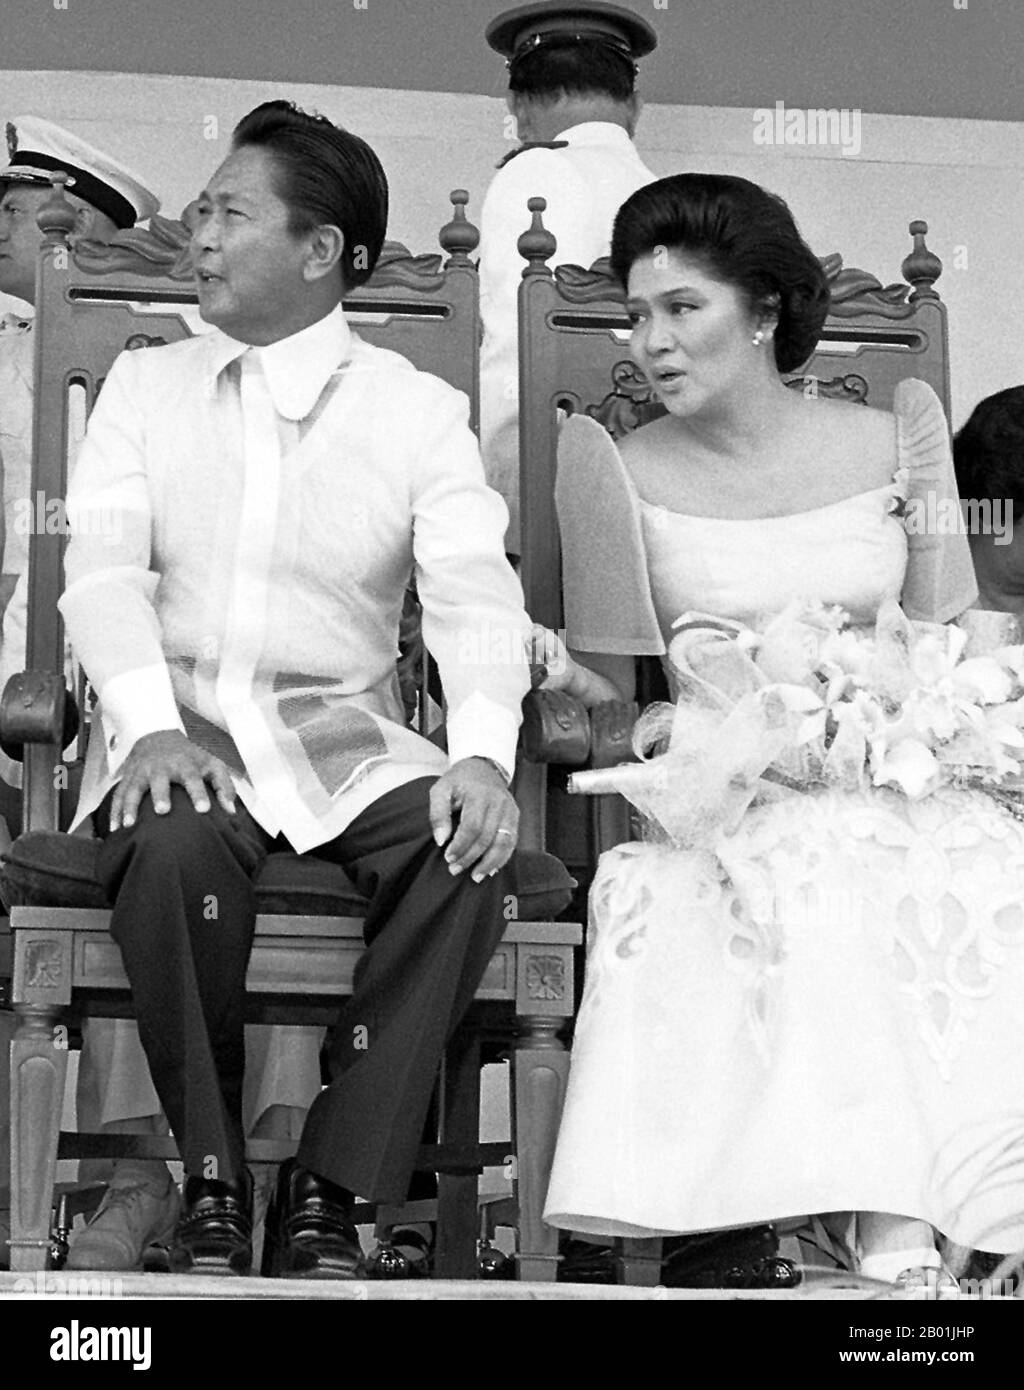 Philippines: President Ferdinand Marcos and First Lady Imelda Marcos at Clark Air Force Base, Luzon, 14 March 1979.  Ferdinand Emmanuel Edralin Marcos (11 September 1917 - 28 September 1989) was the 10th President of the Philippines from 1965 to 1986. He was a lawyer, member of the Philippine House of Representatives (1949-1959) and a member of the Philippine Senate (1959-1965).  In 1983, his government was implicated in the assassination of his primary political opponent, Benigno Aquino, Jr. The implication caused a chain of events that eventually led to Marcos' removal from power in 1986. Stock Photo